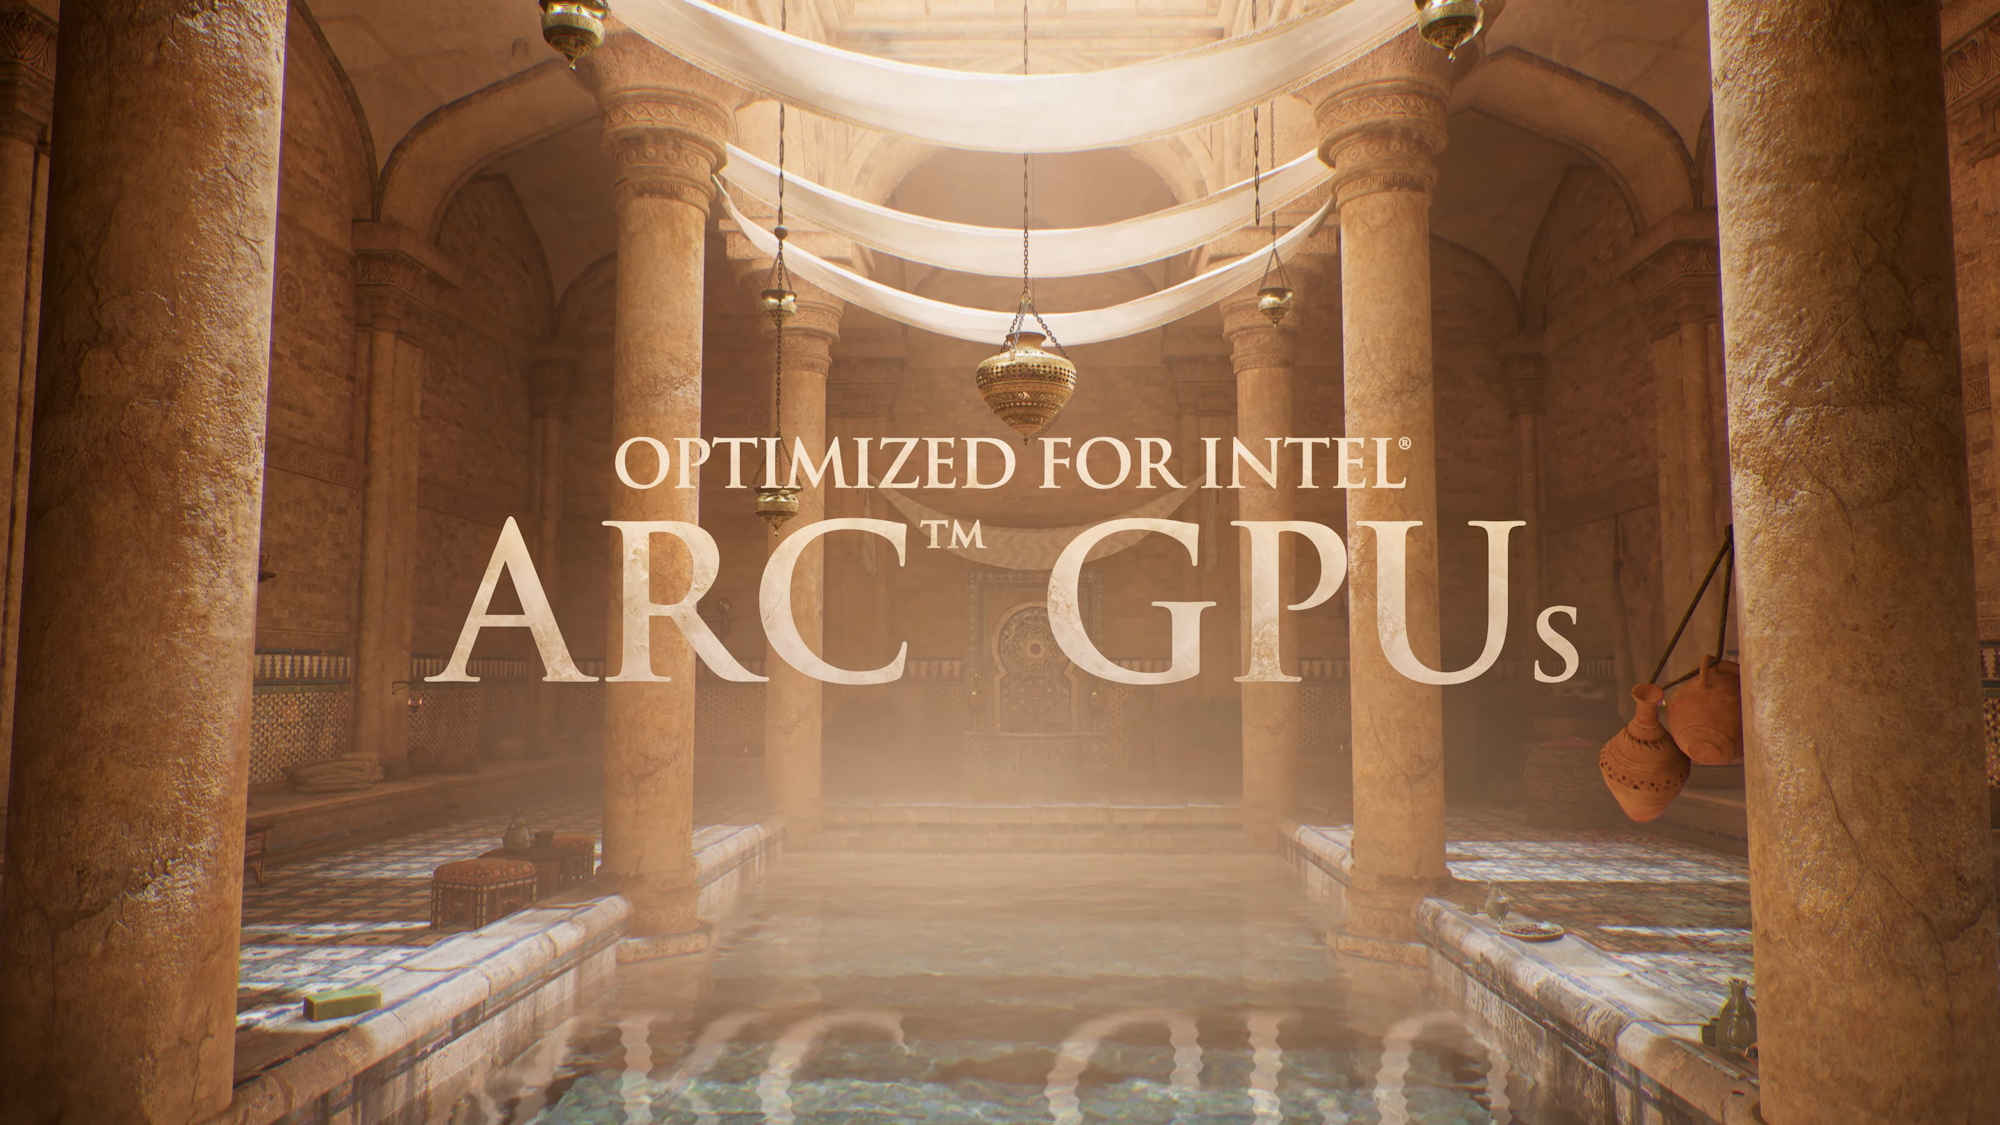 Assassin's Creed Mirage system requirements